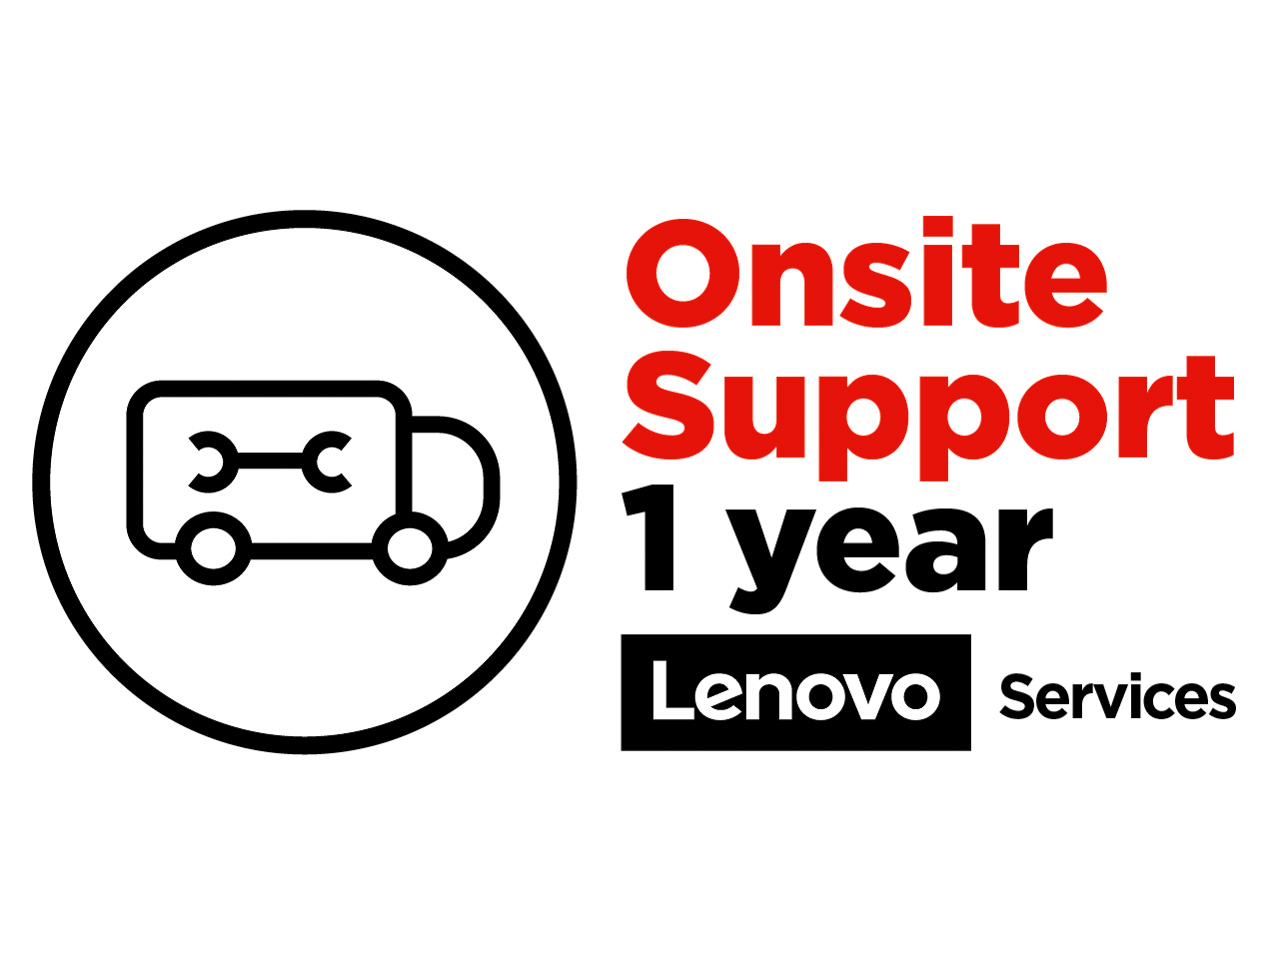 LENOVO ONSITE SERVICE FOR 1 YEAR 5PS0K82845 for Thinkpad 1